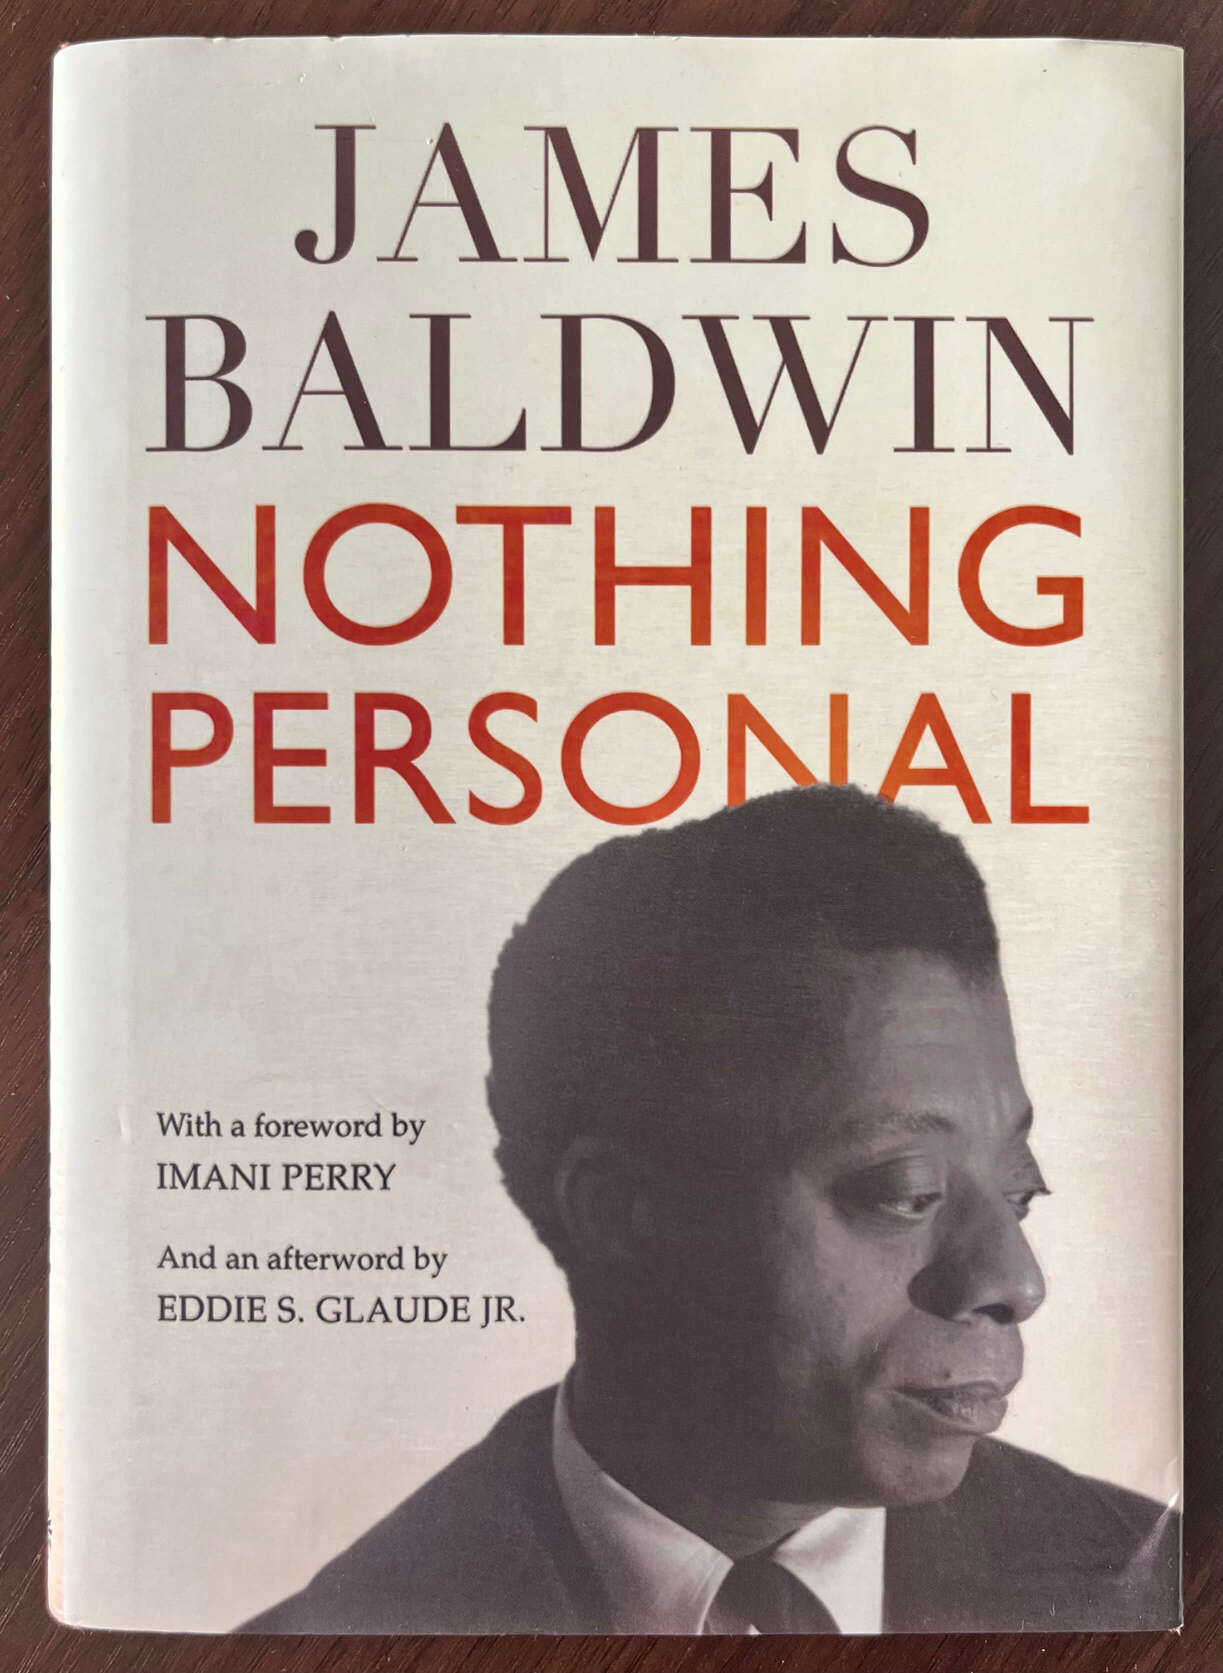 “Nothing Personal” by James Baldwin. With a foreword by Imani Perry and an afterword by Eddie S. Glaude Jr.